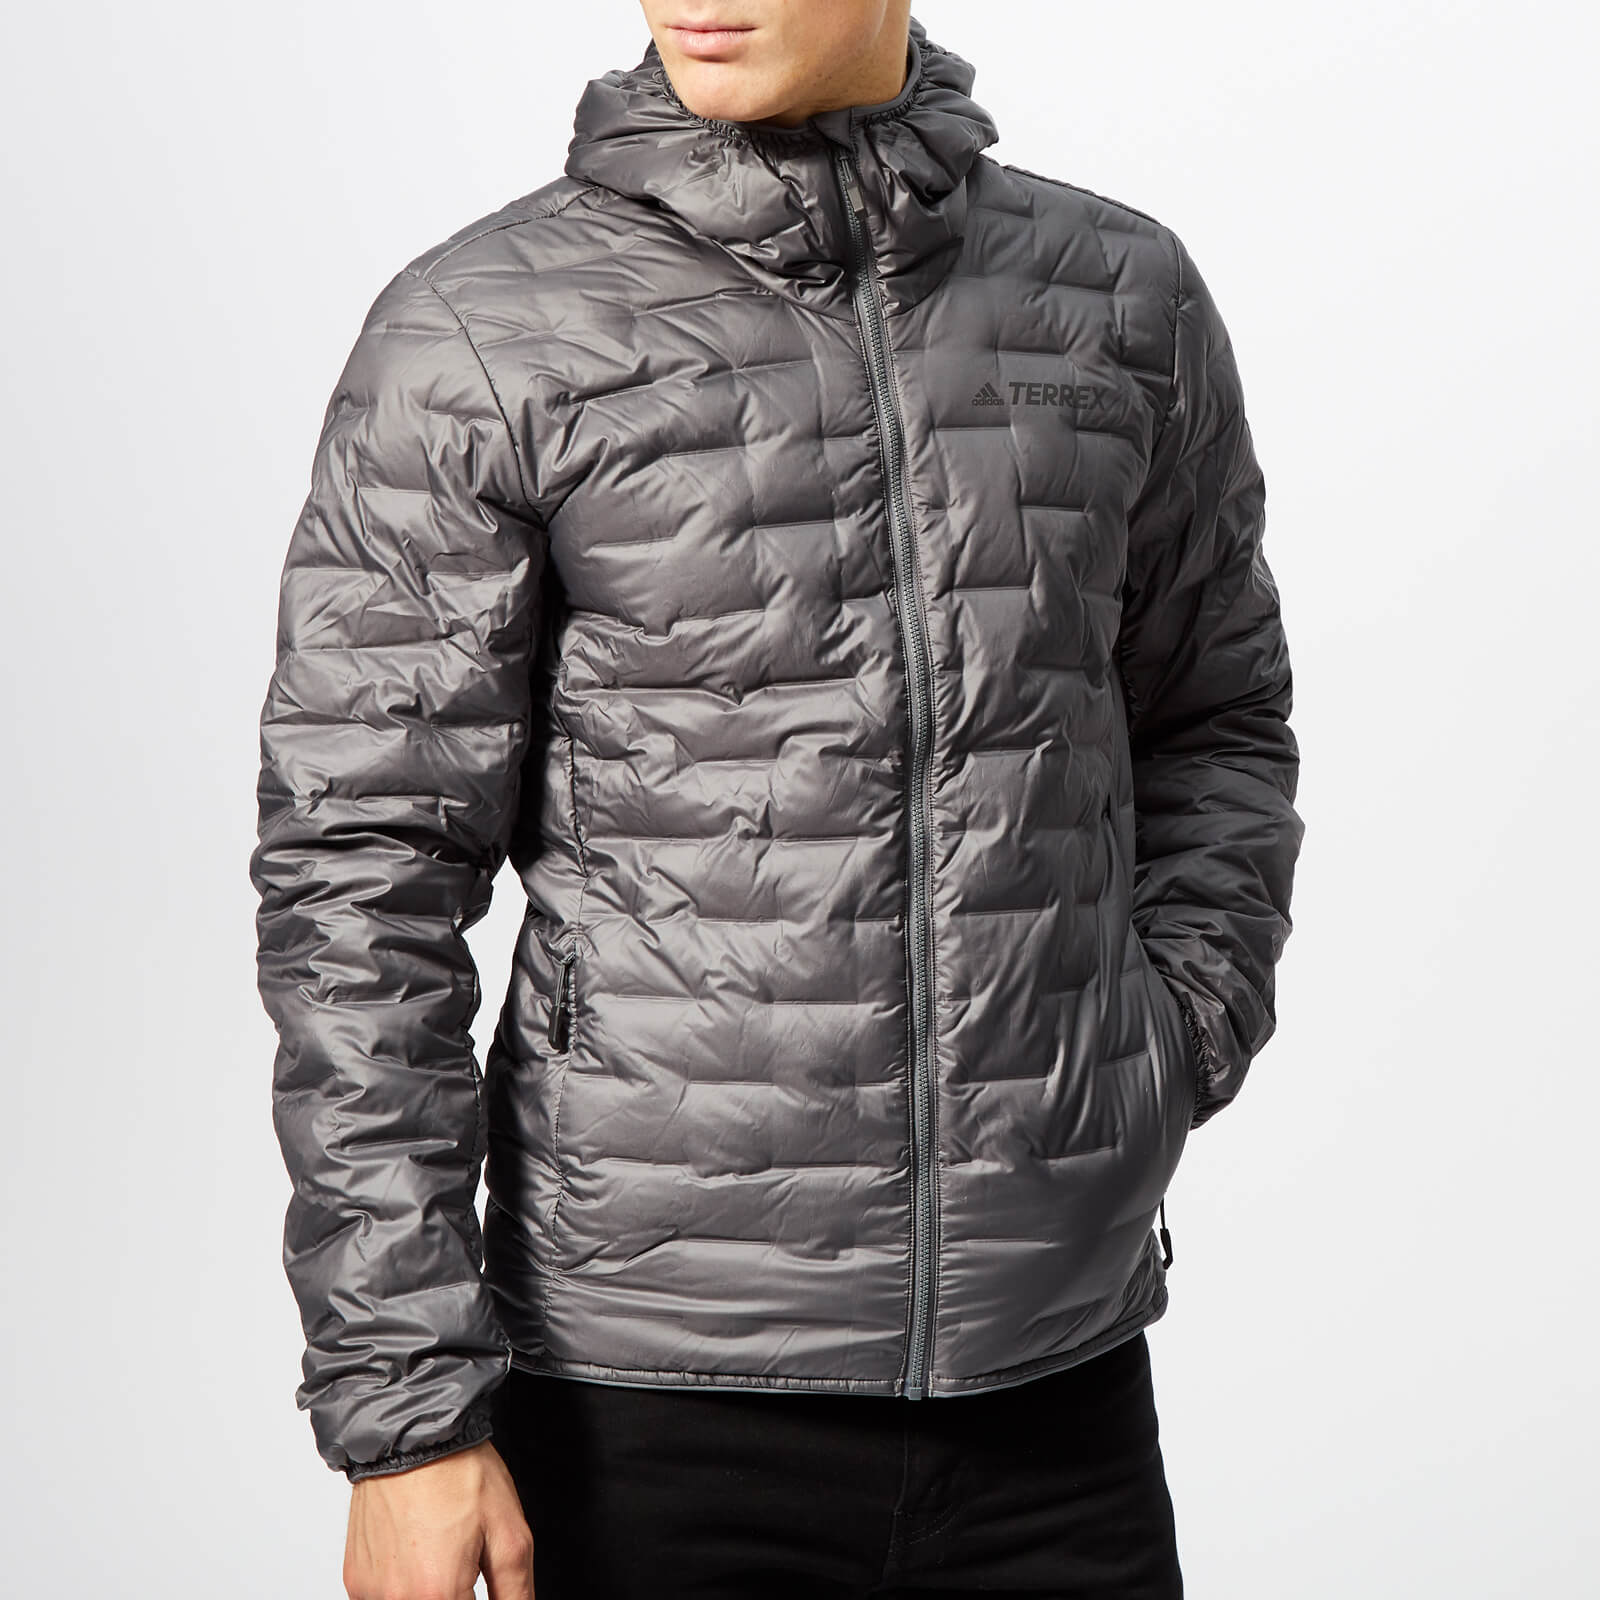 adidas packable down jacket